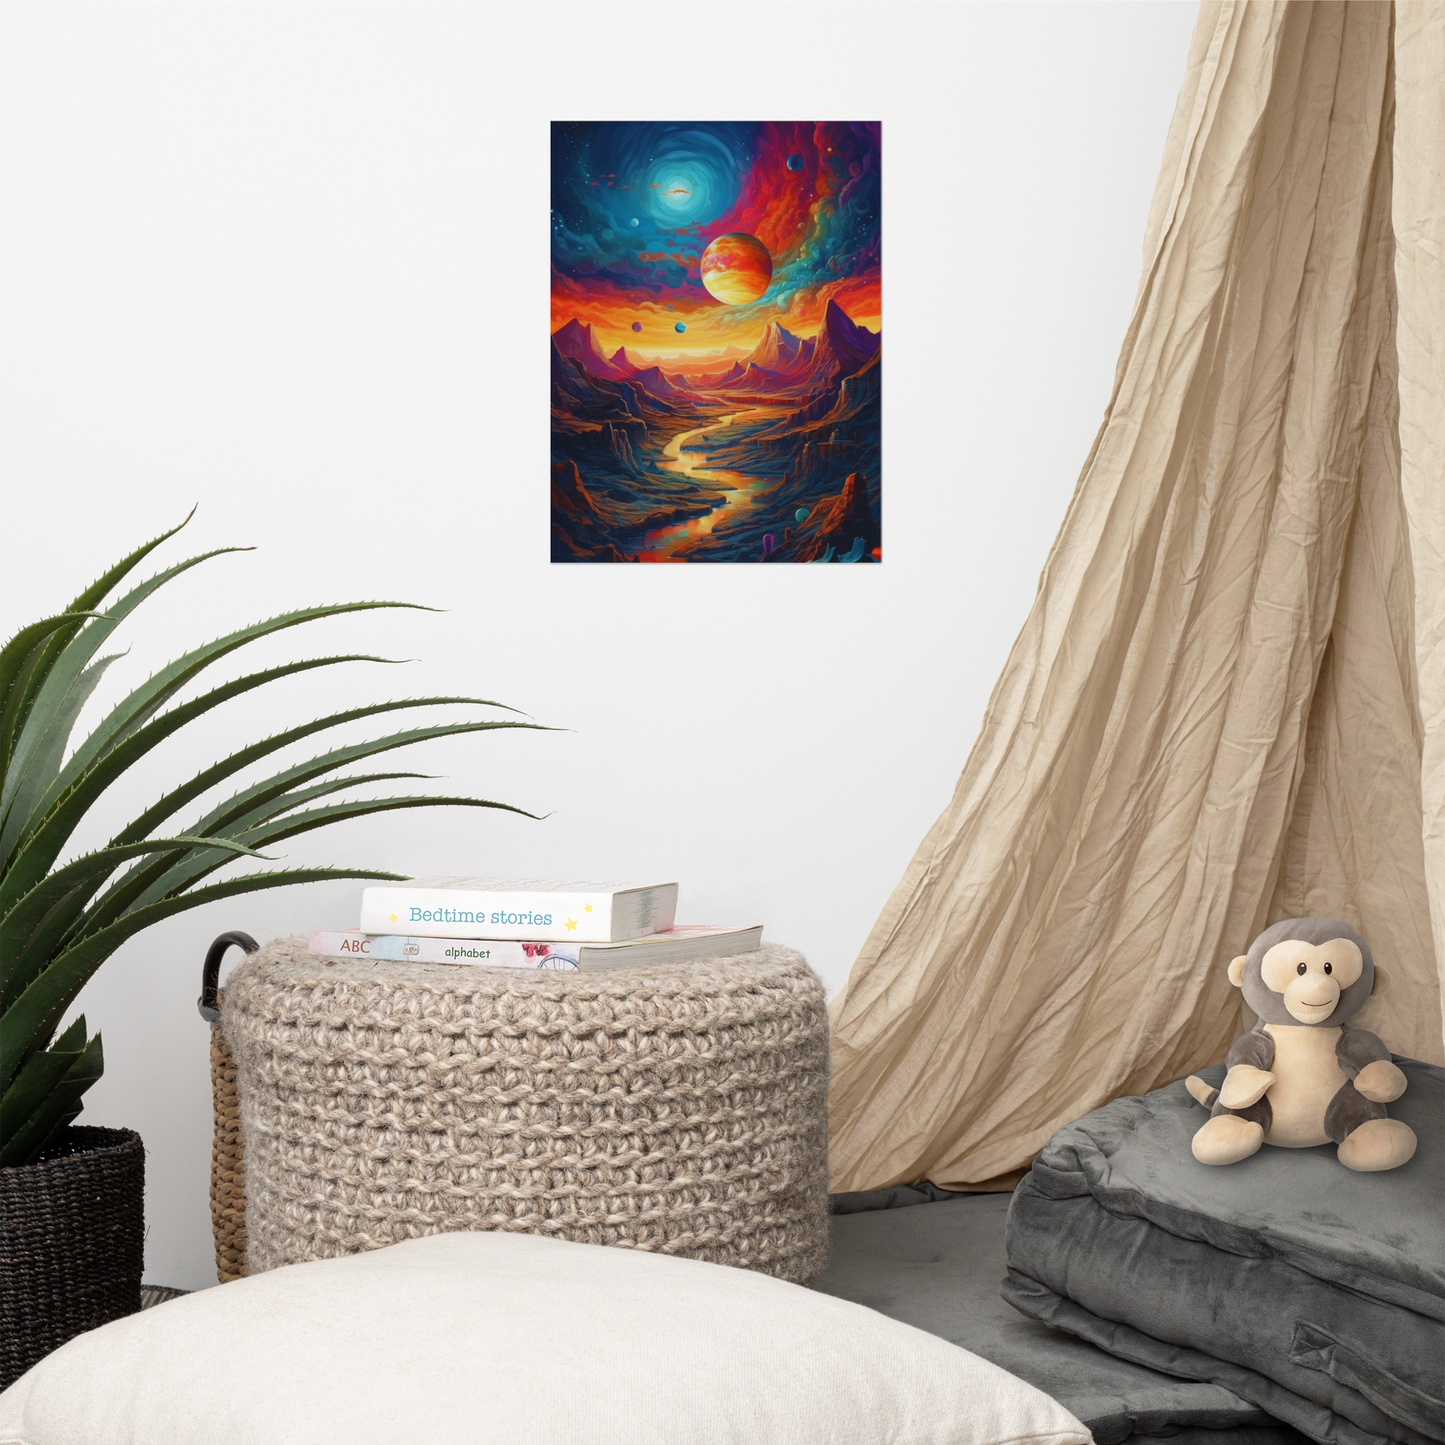 Stunning Extraterrestrial Landscape Art Poster: Vibrant Colors, Planets, and Mountains